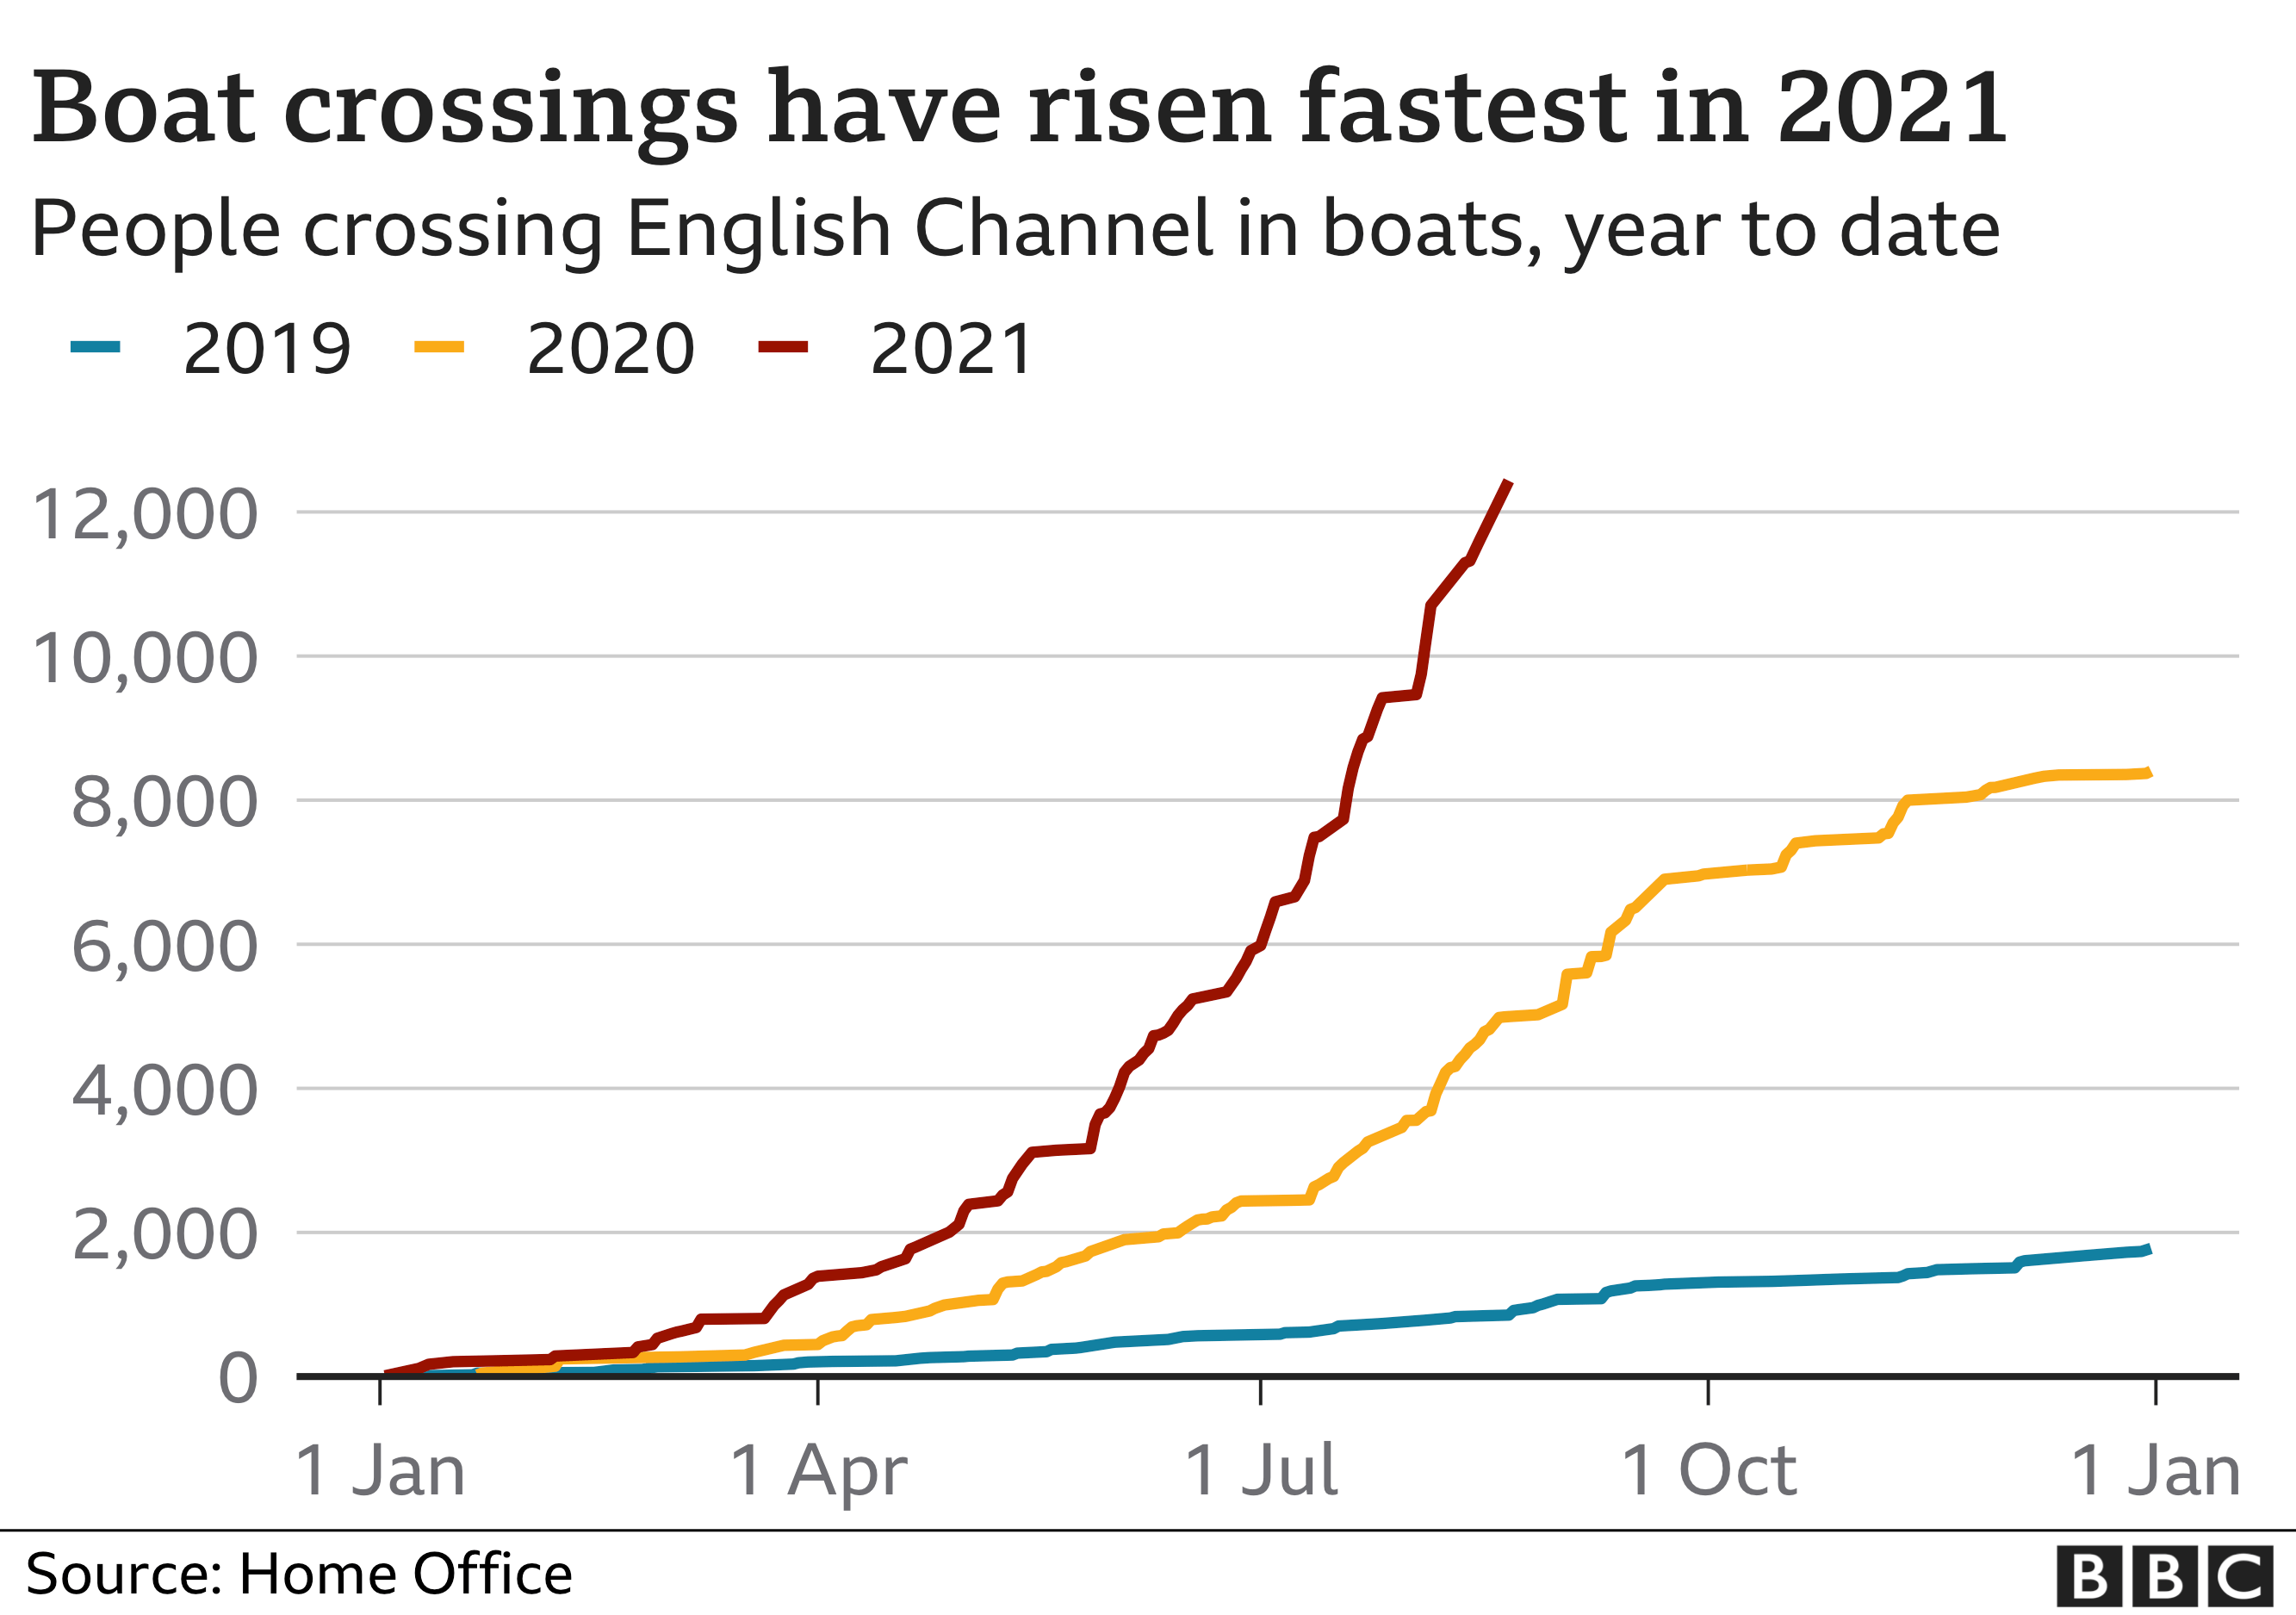 Chart showing number of boat crossings